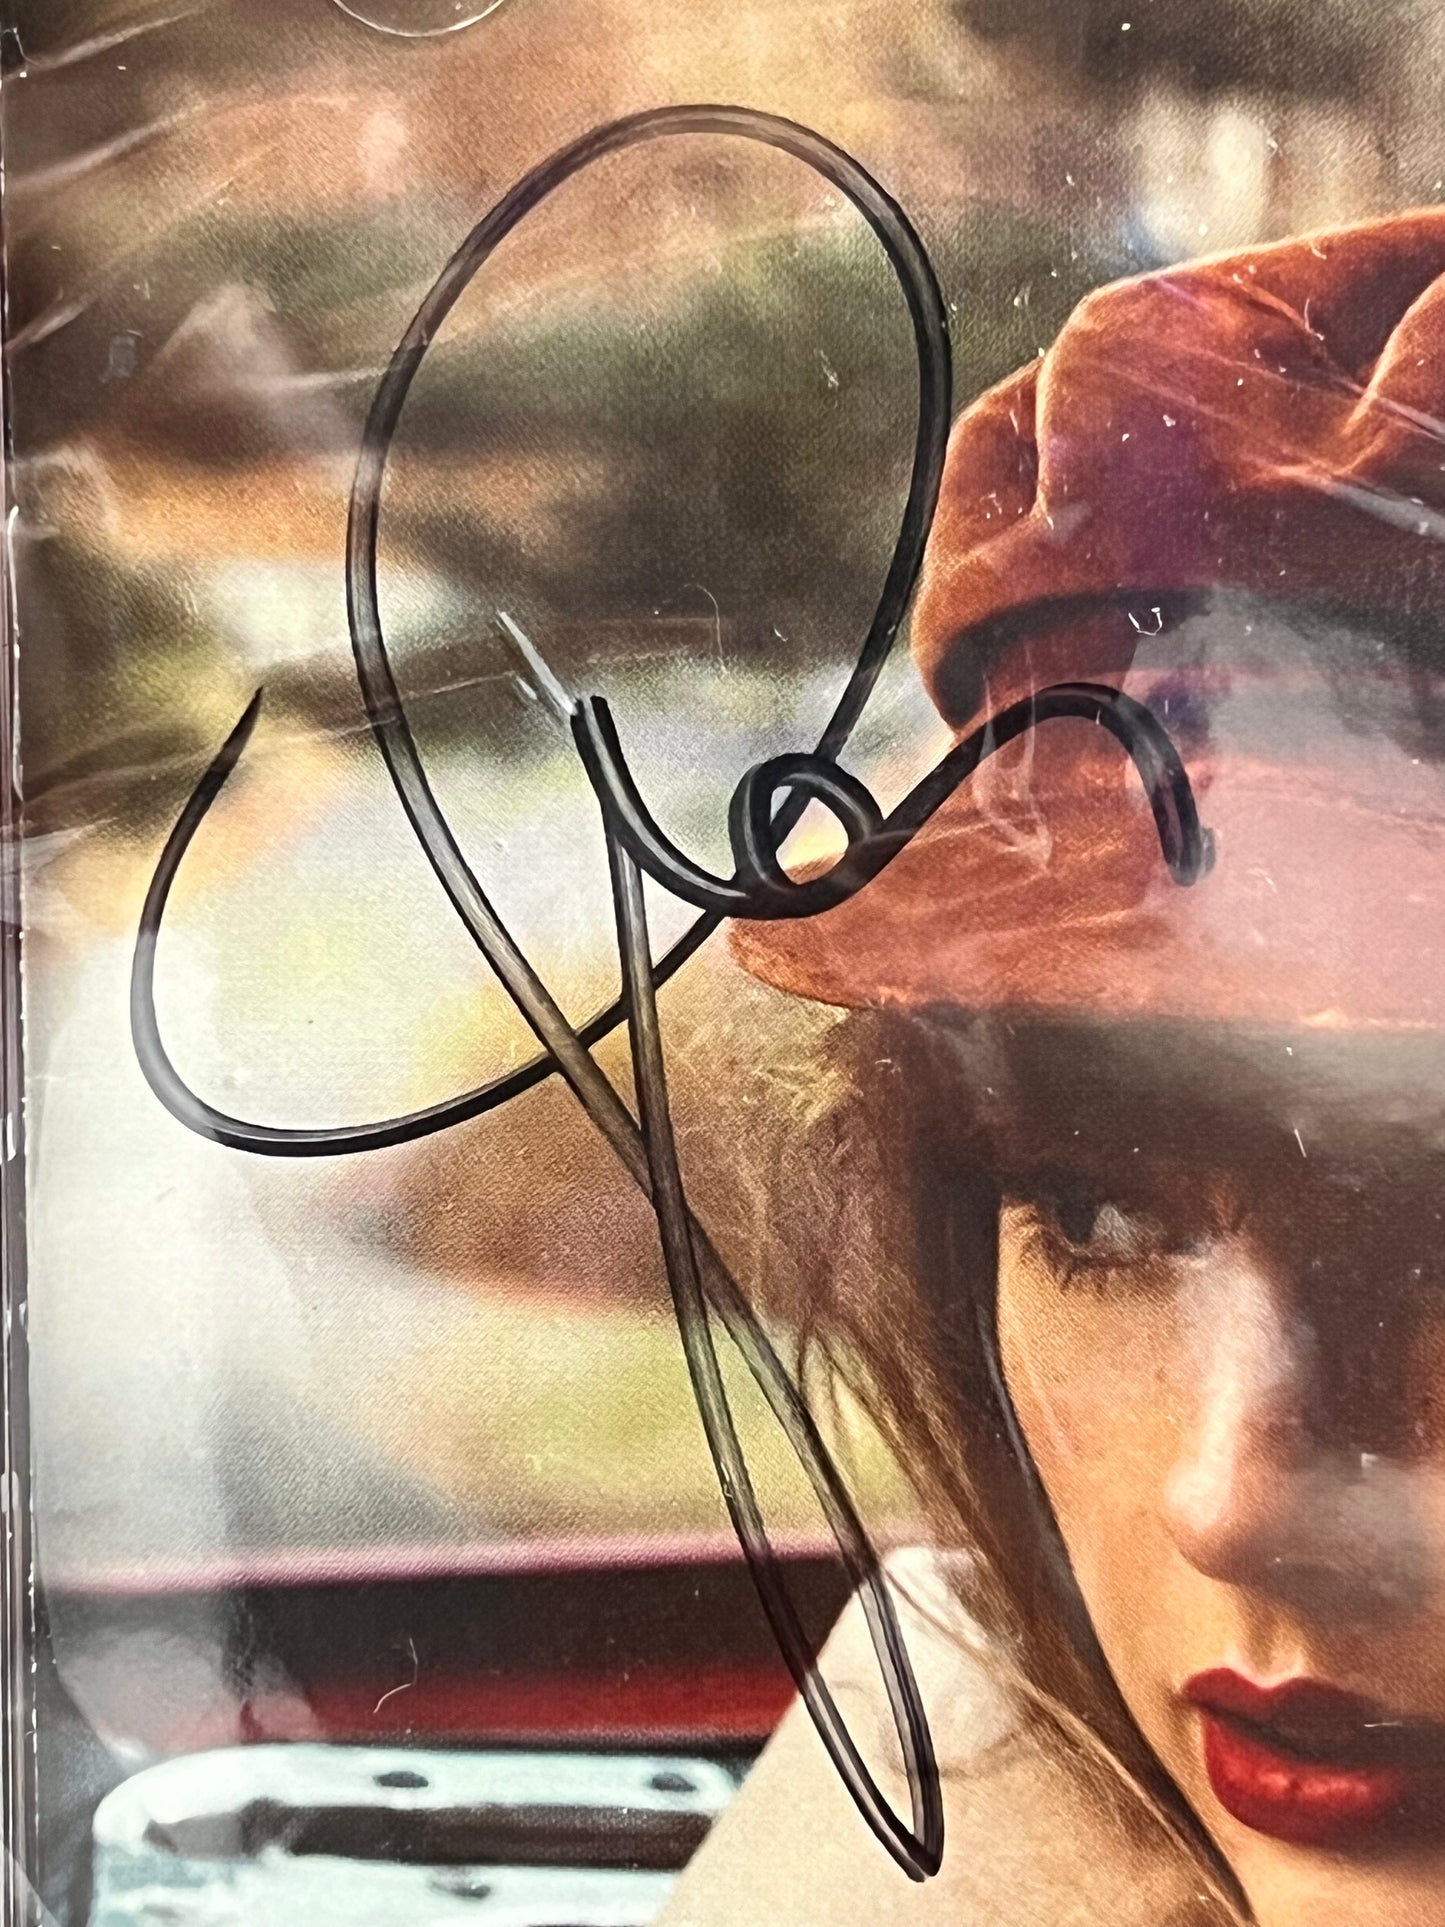 Taylor Swift Signed CD “Red album”